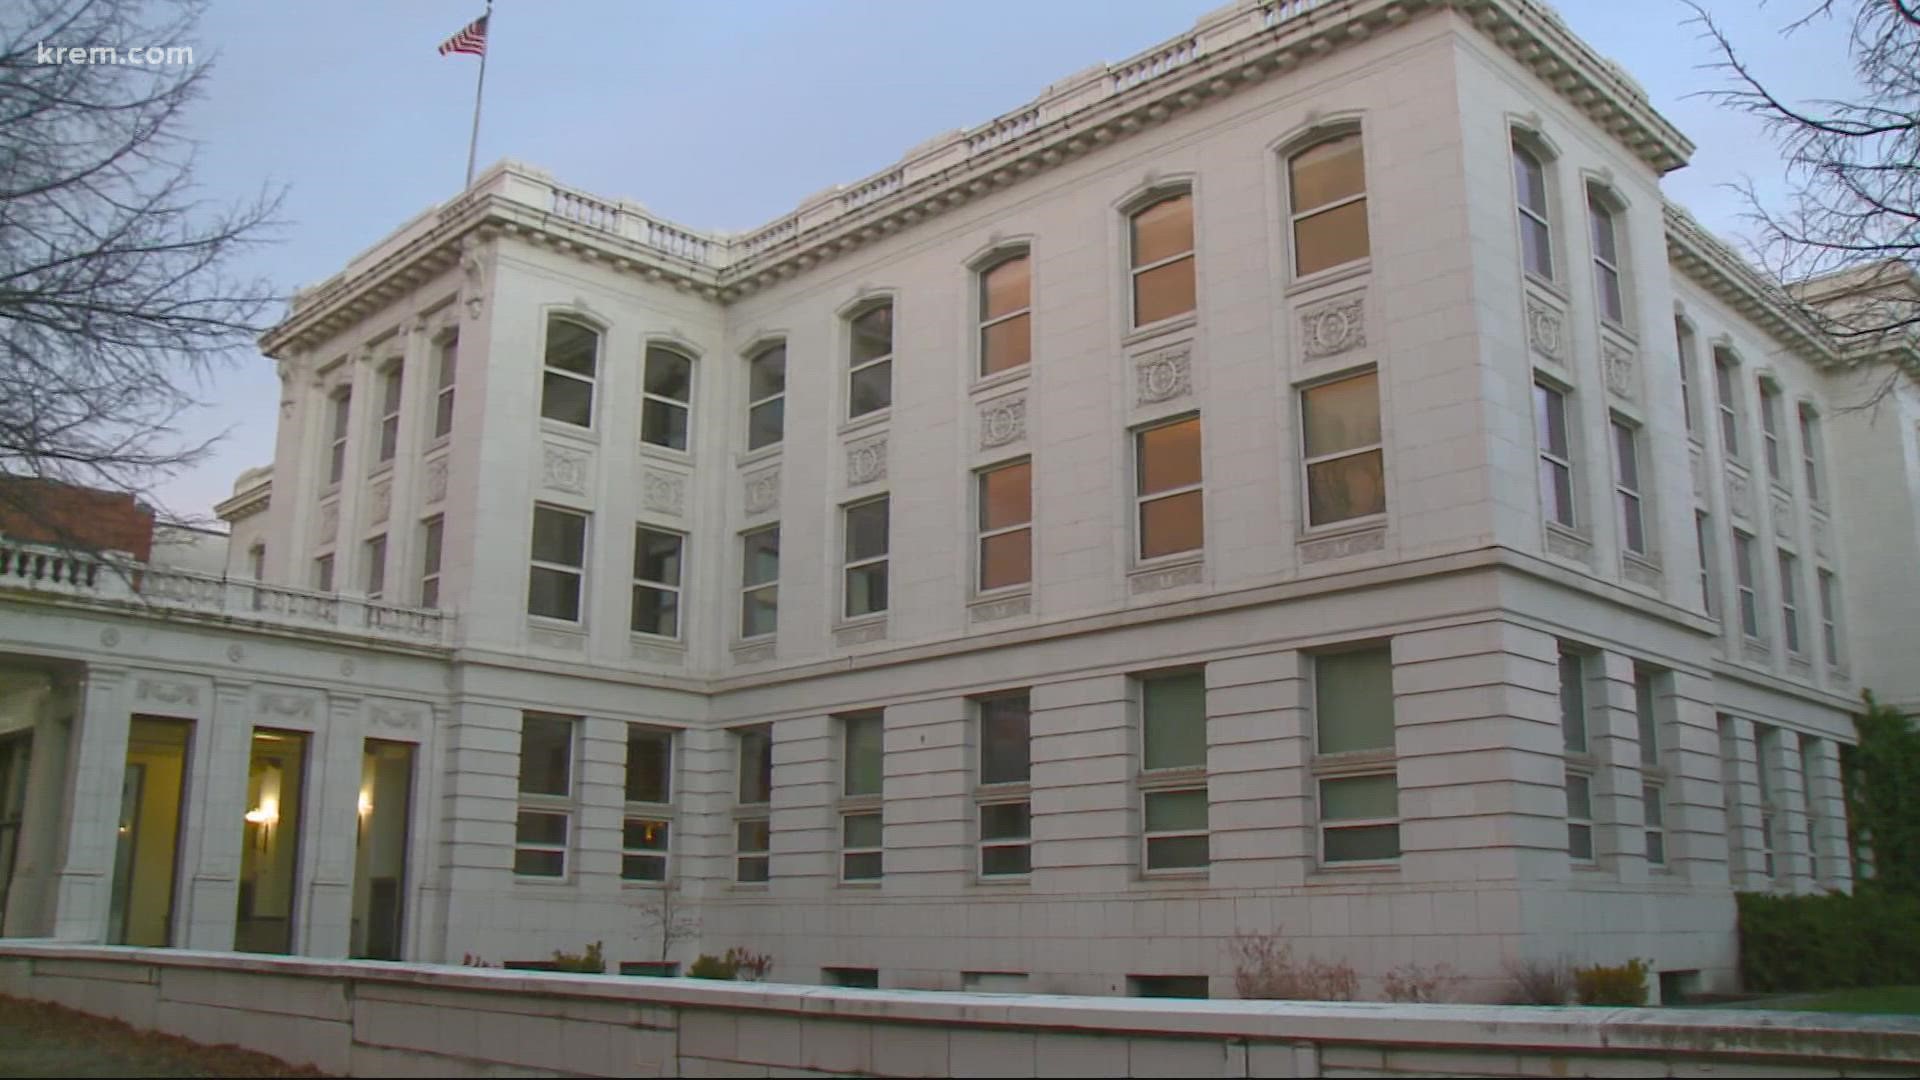 The building, which dates back to 1910, was vacated in 2019 due to safety and operational concerns.